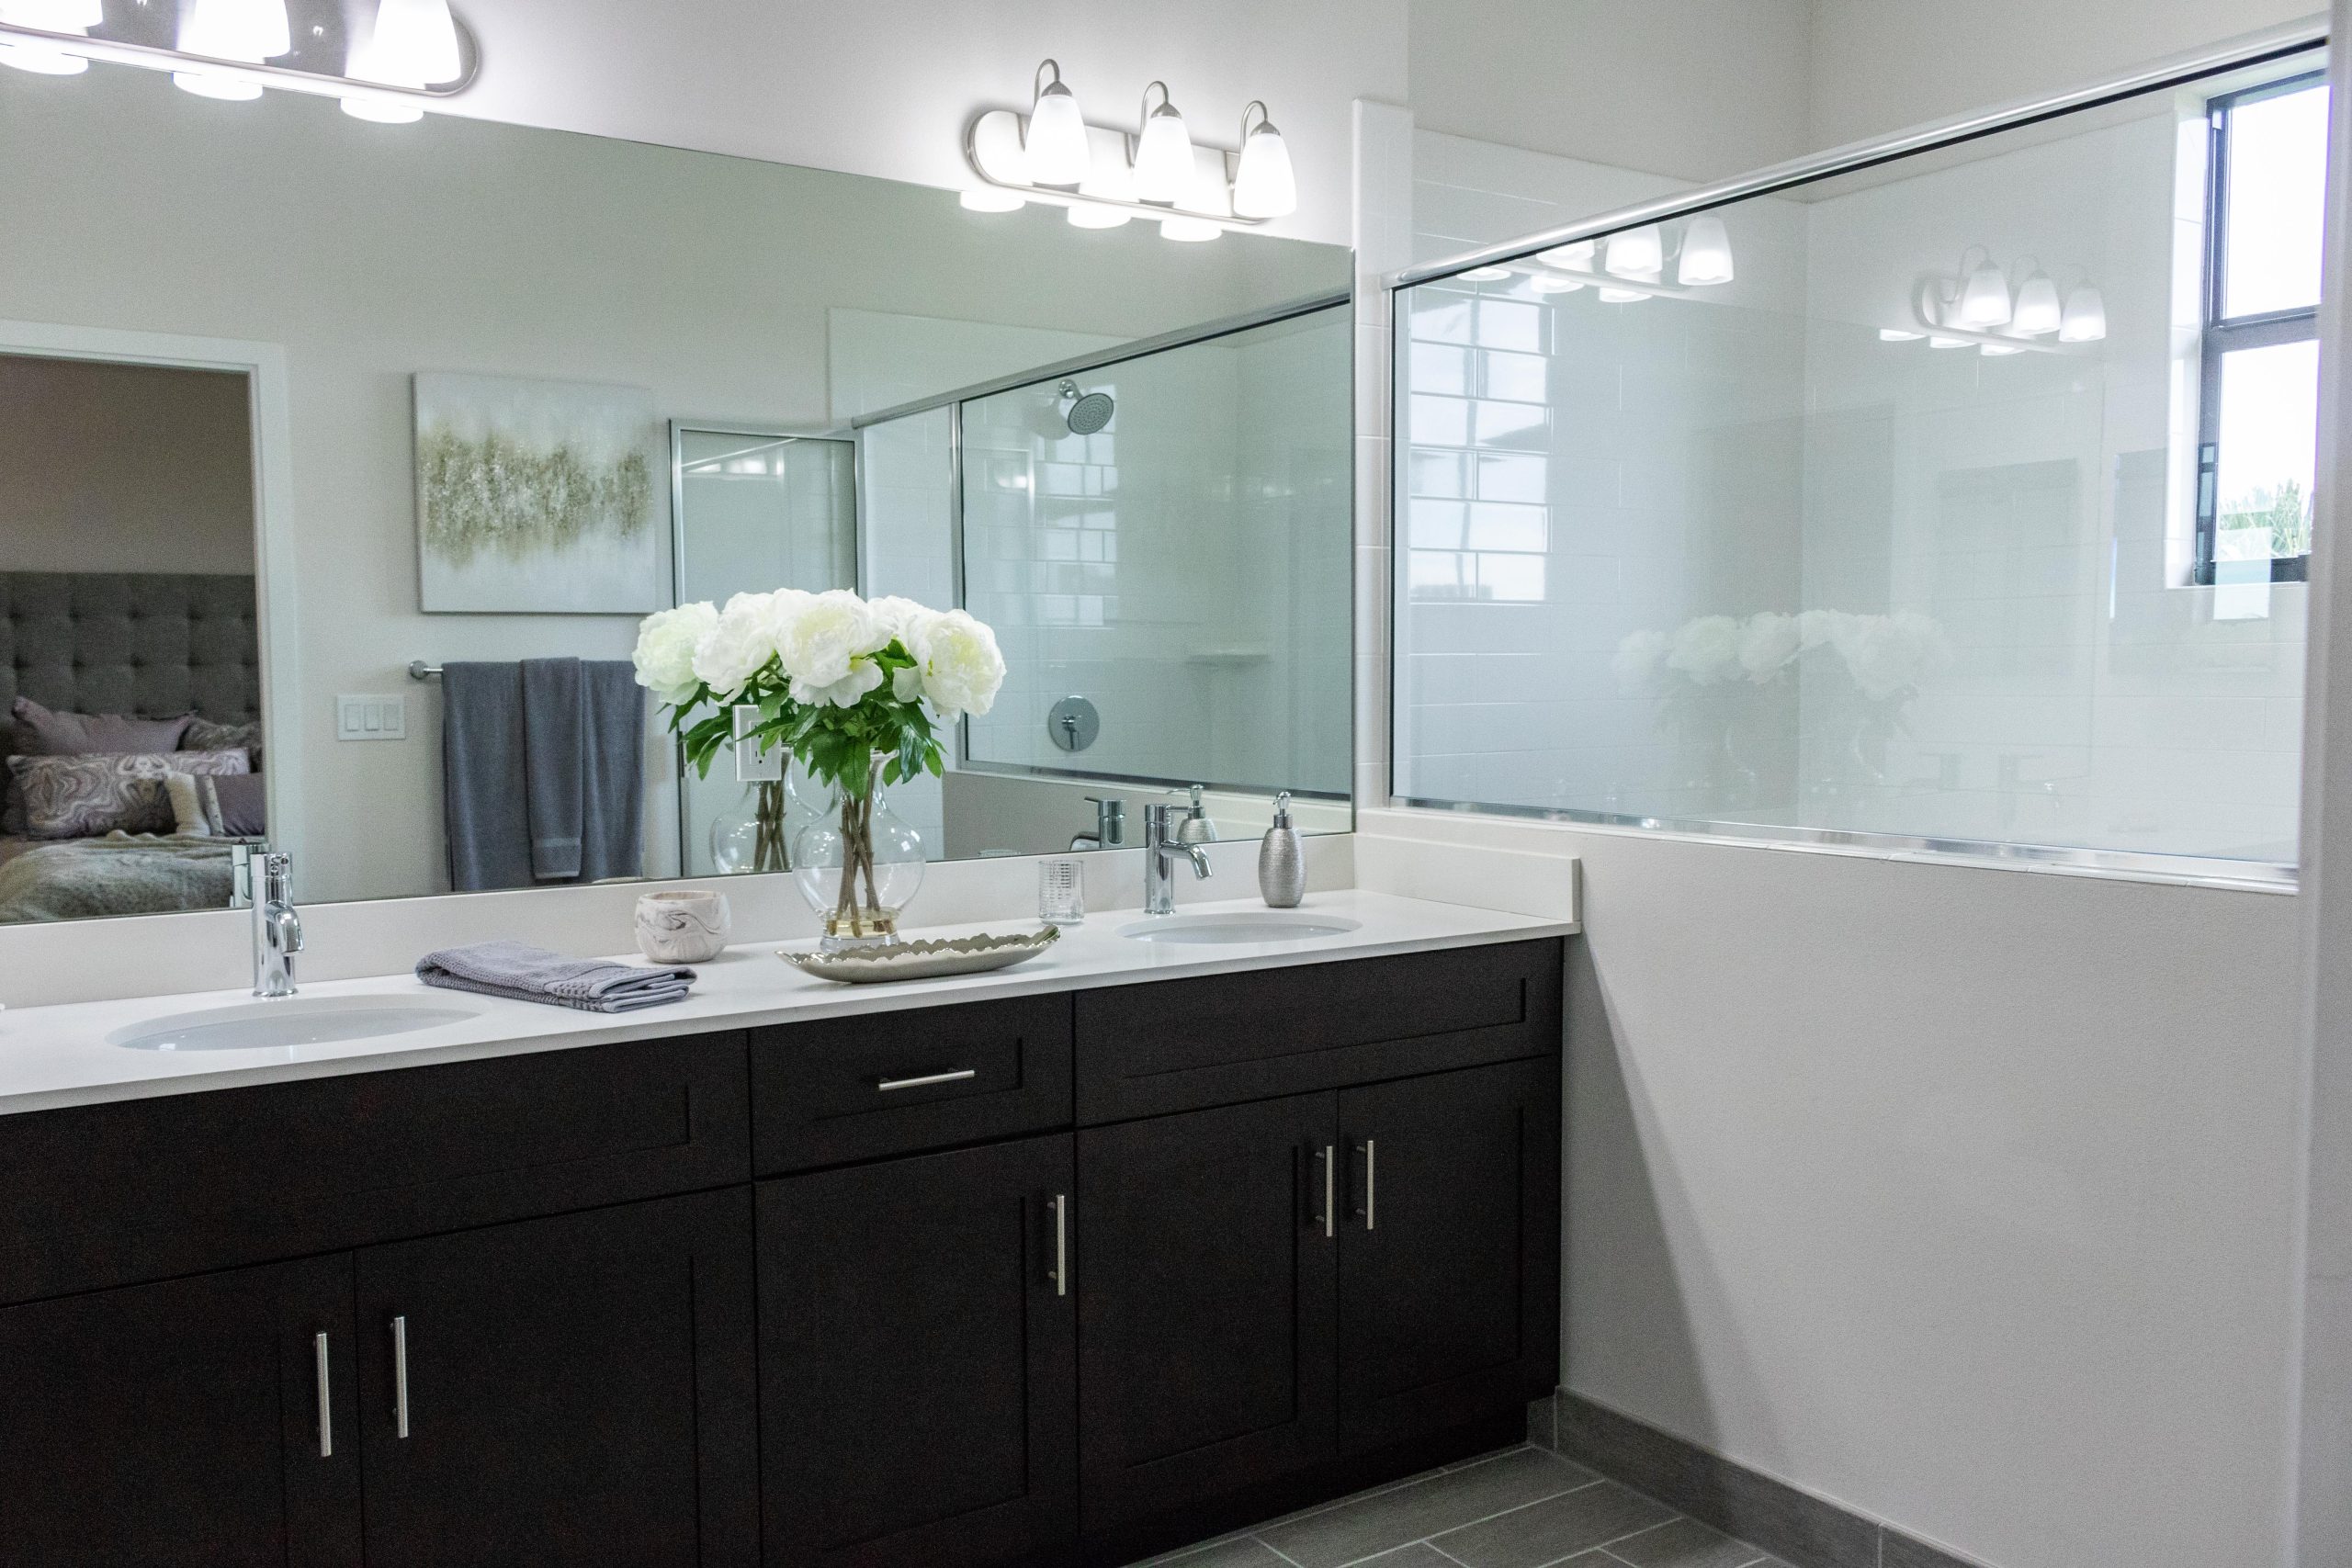 A beautiful bathroom with a countertop and lightings.